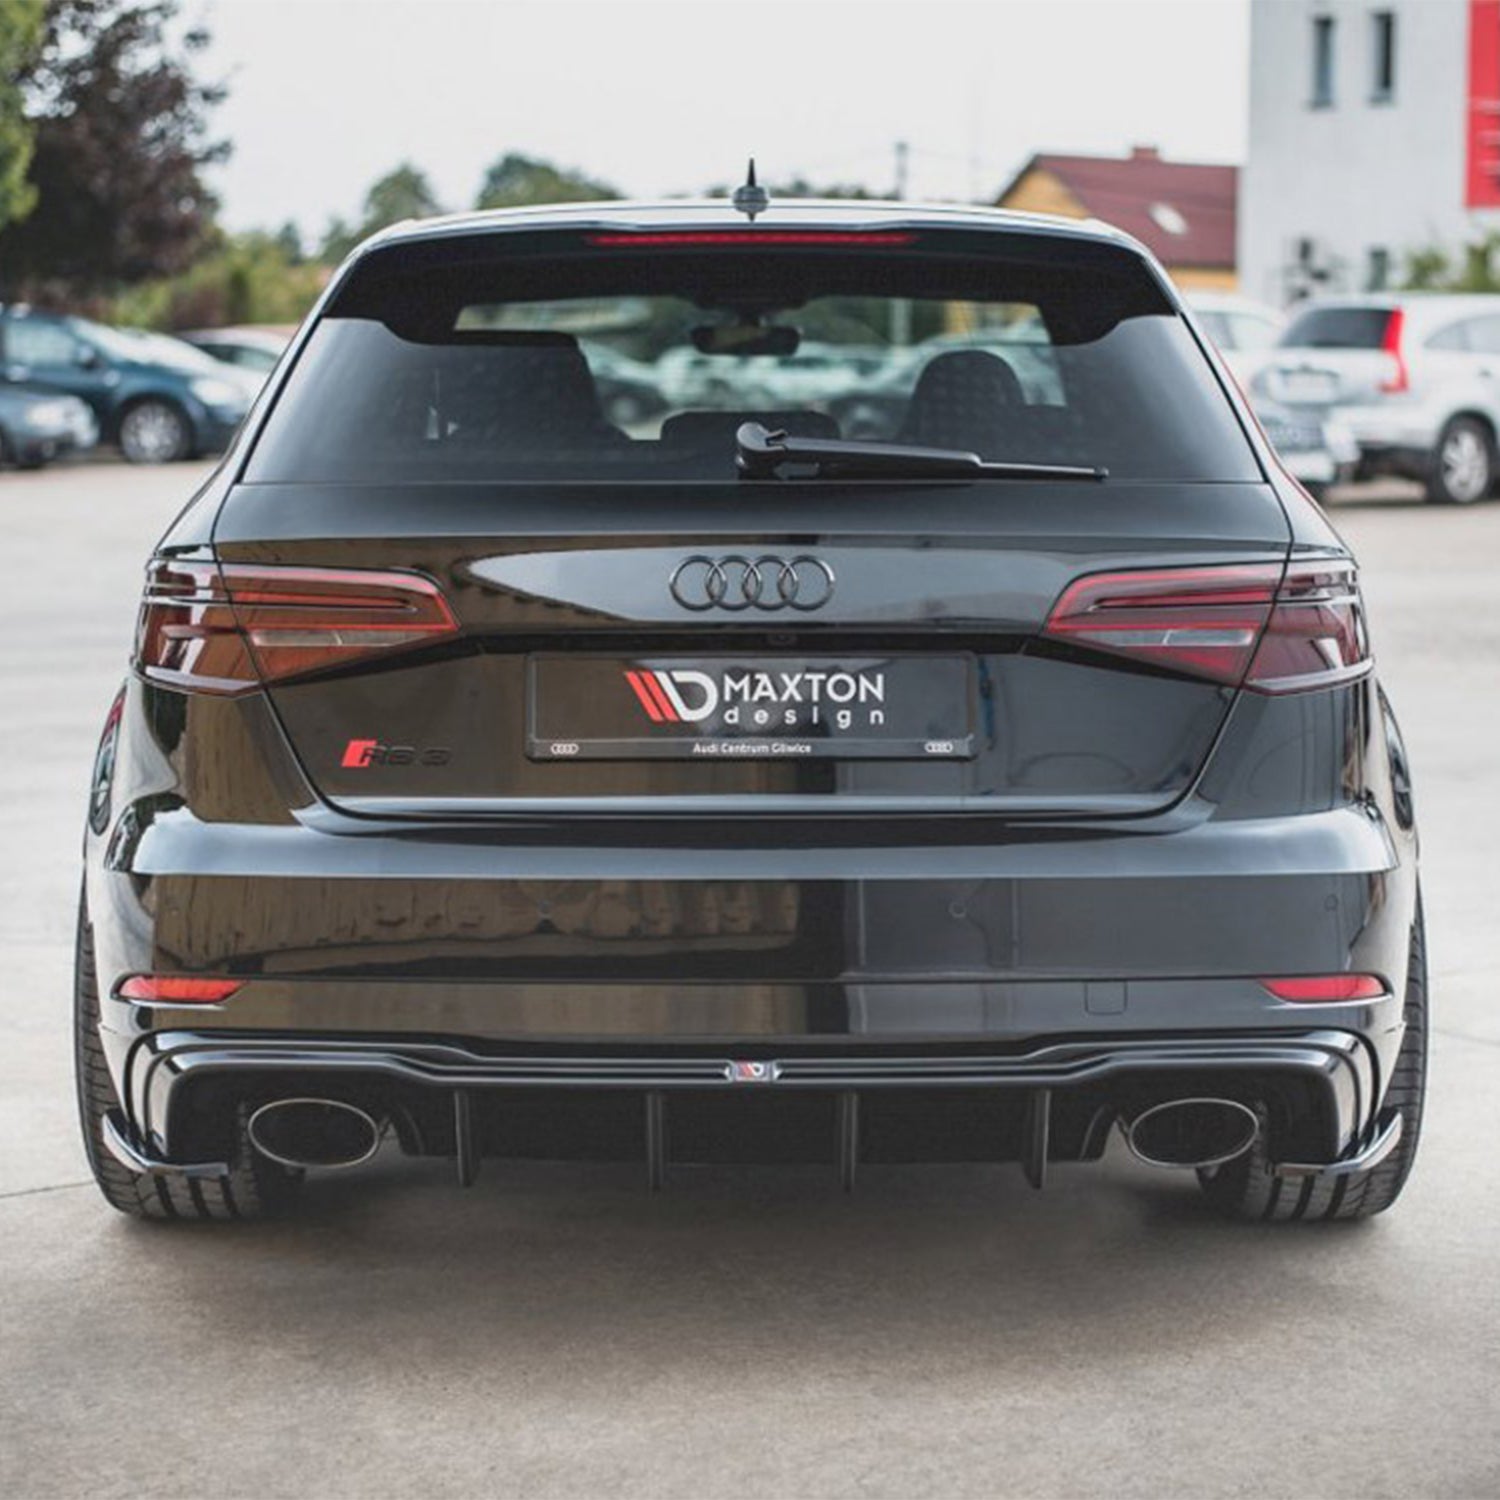 Maxton Design Audi RS3 8V Facelift V2 Gloss Black Aggressive Rear Diffuser Fitted To Back Of Vehicle